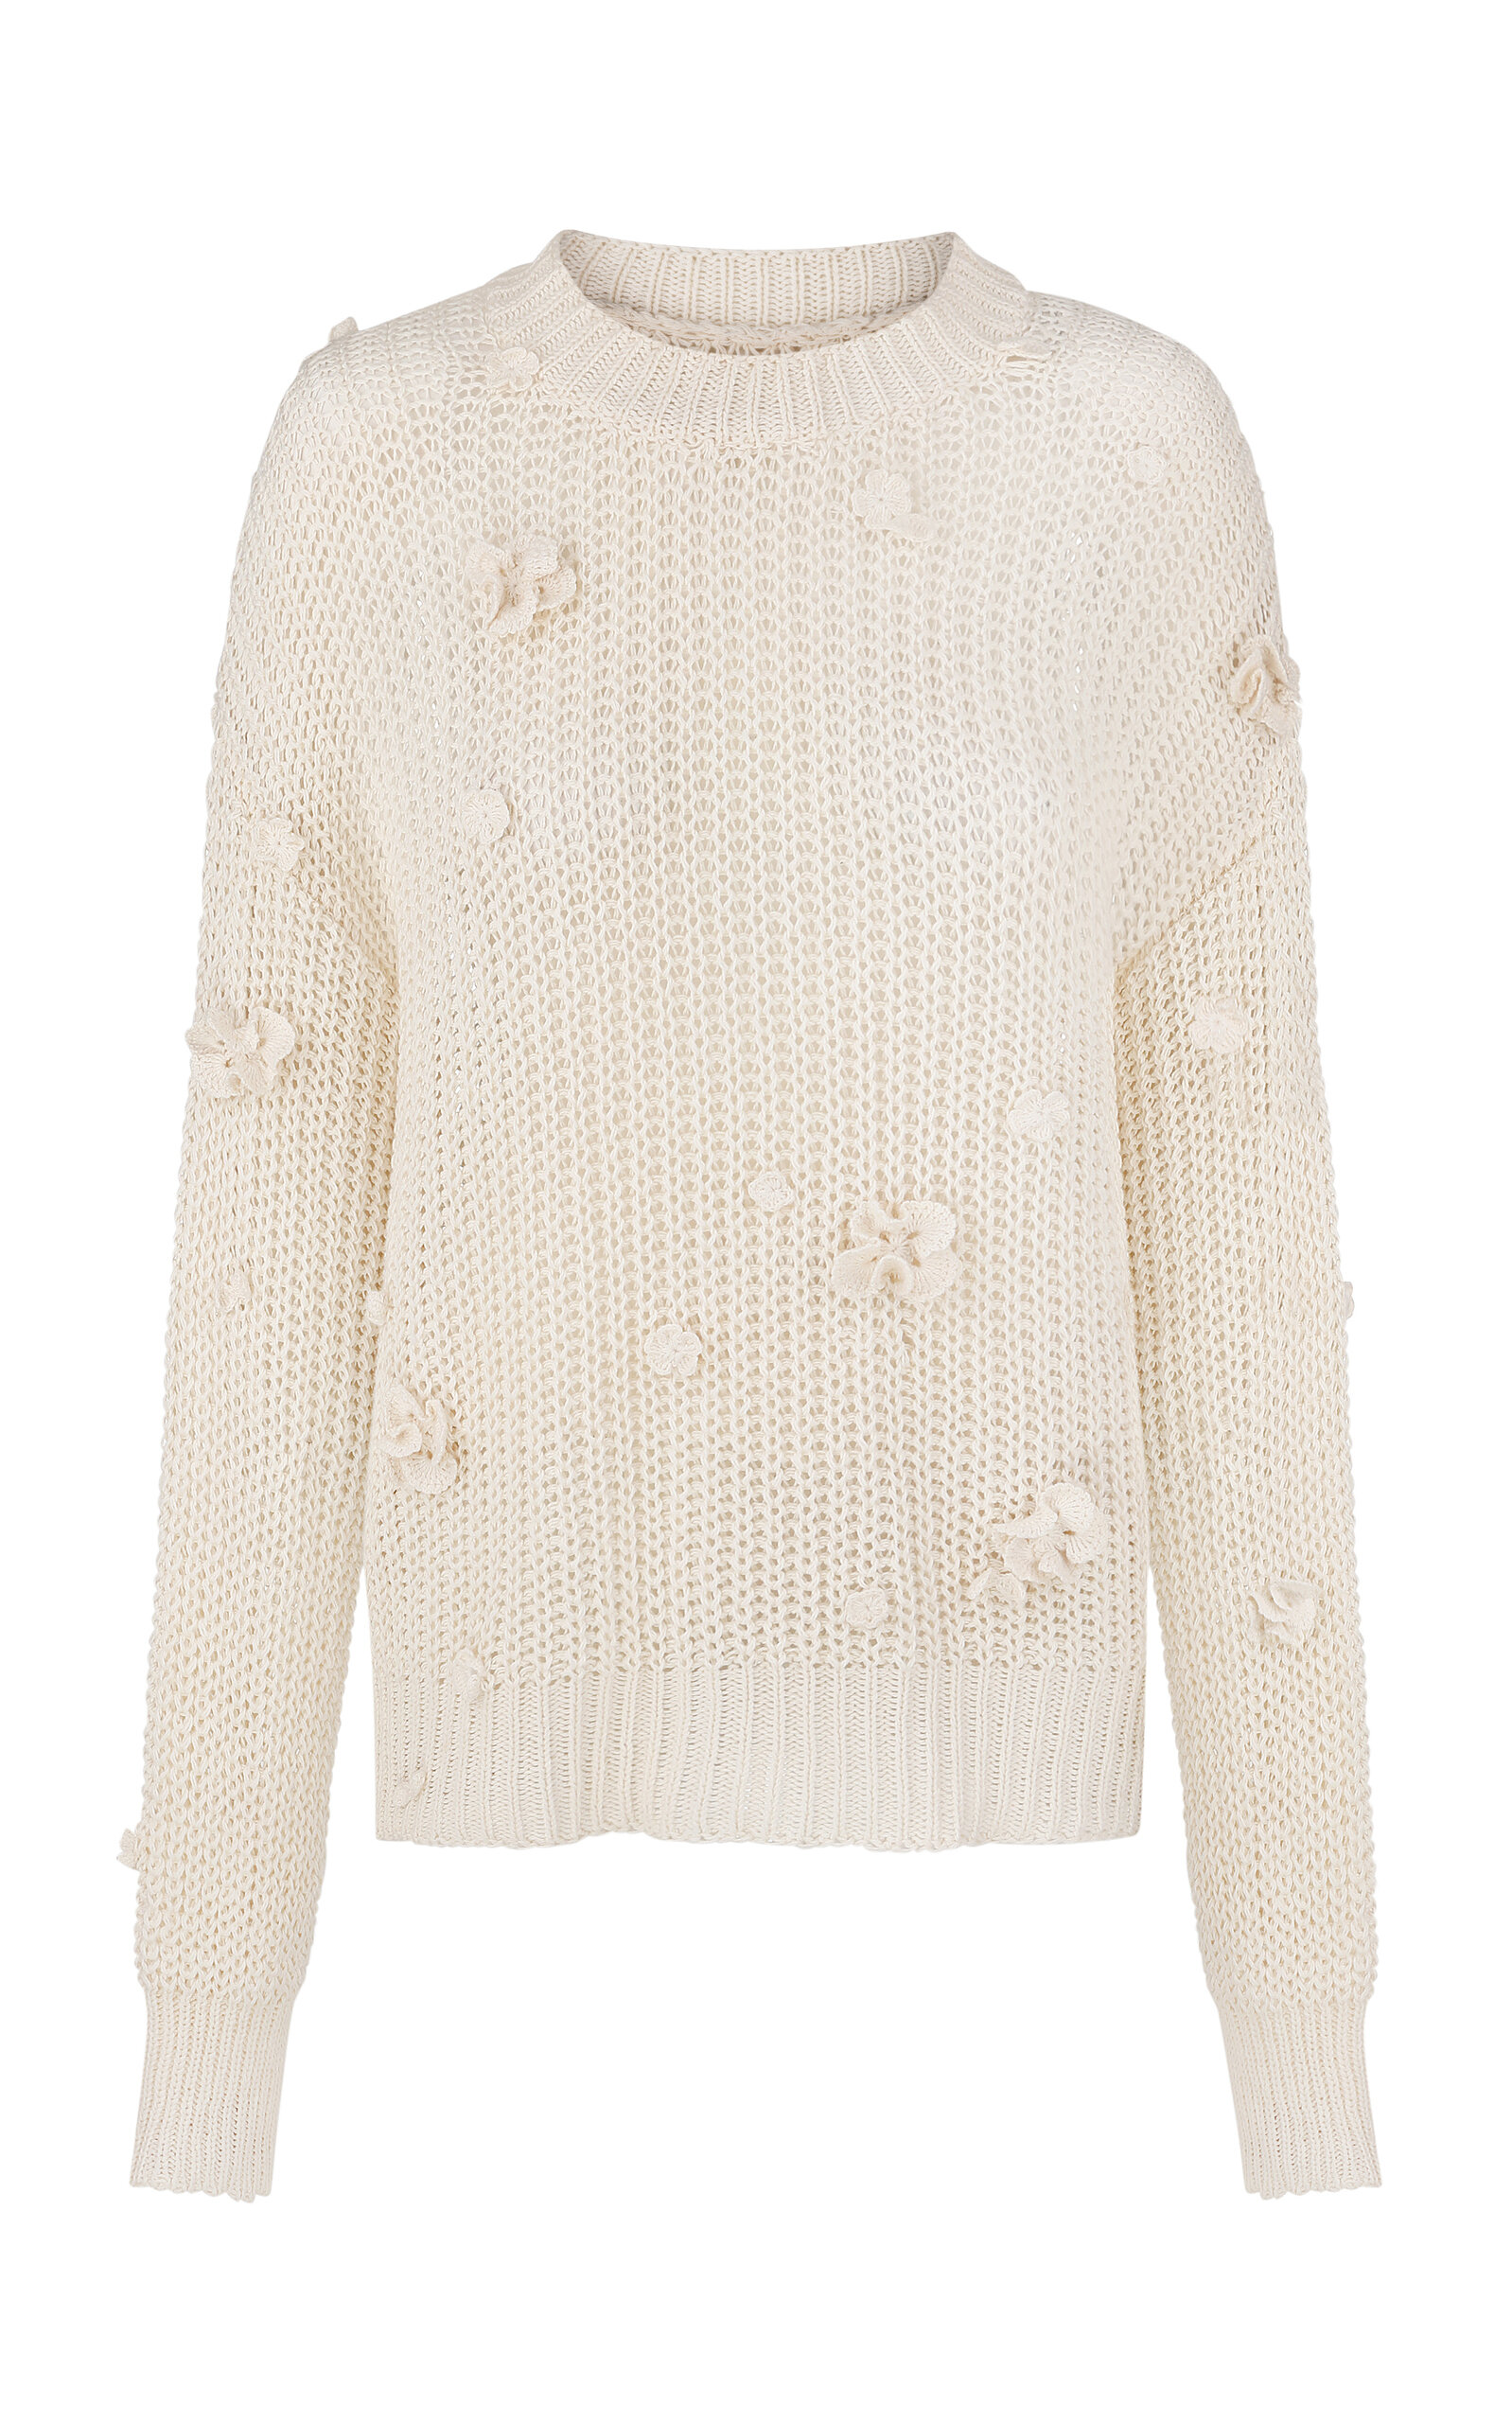 Shelly Flower-Embellished Organic Cotton Sweater